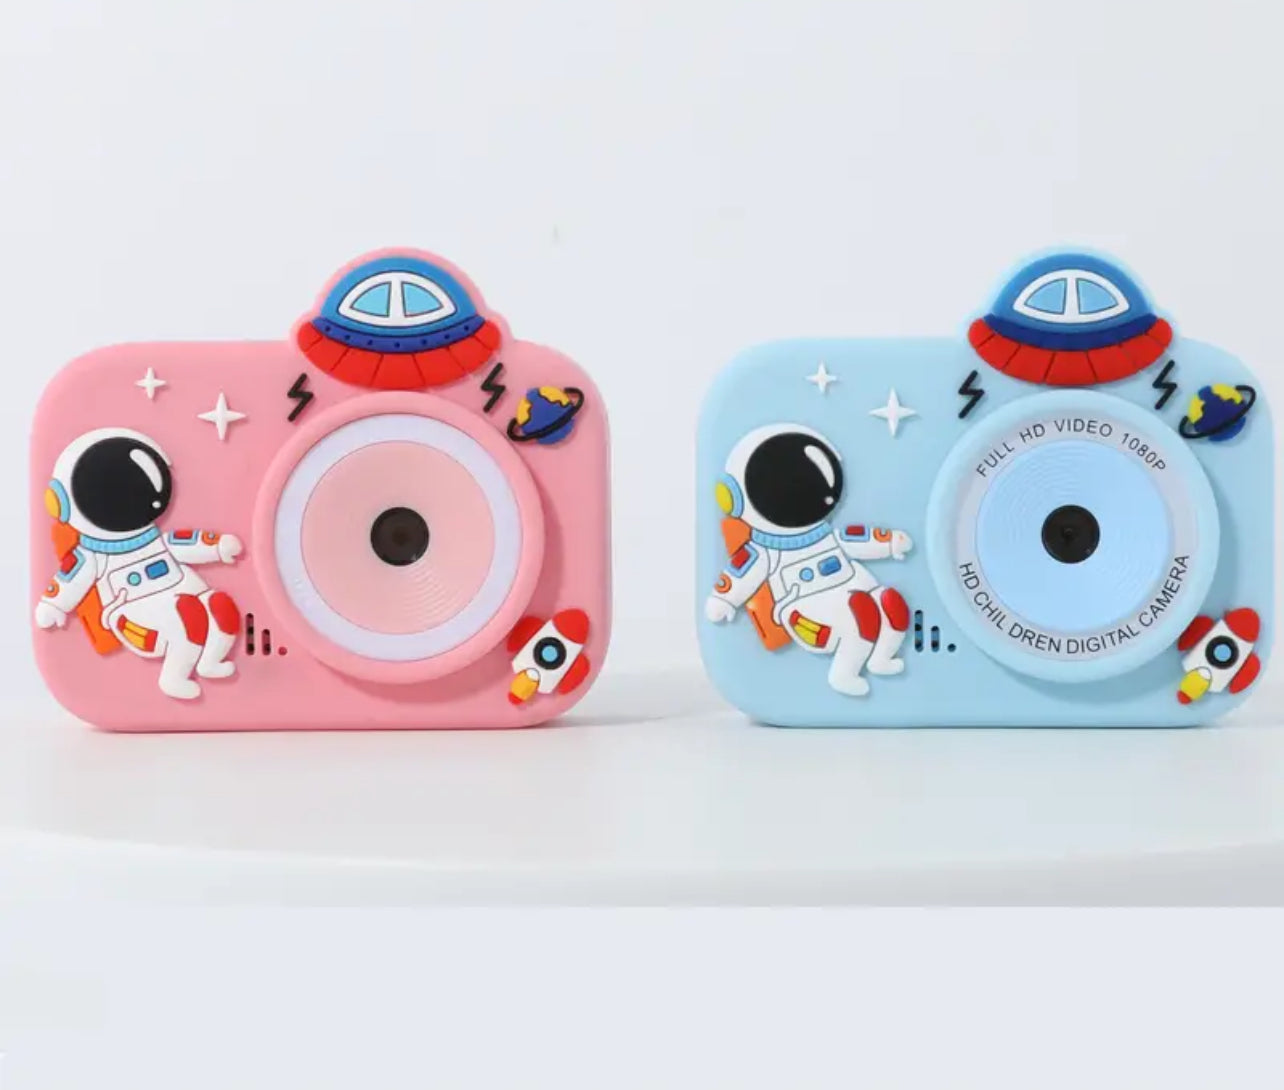 The Ultimate Kid's Camera with Games